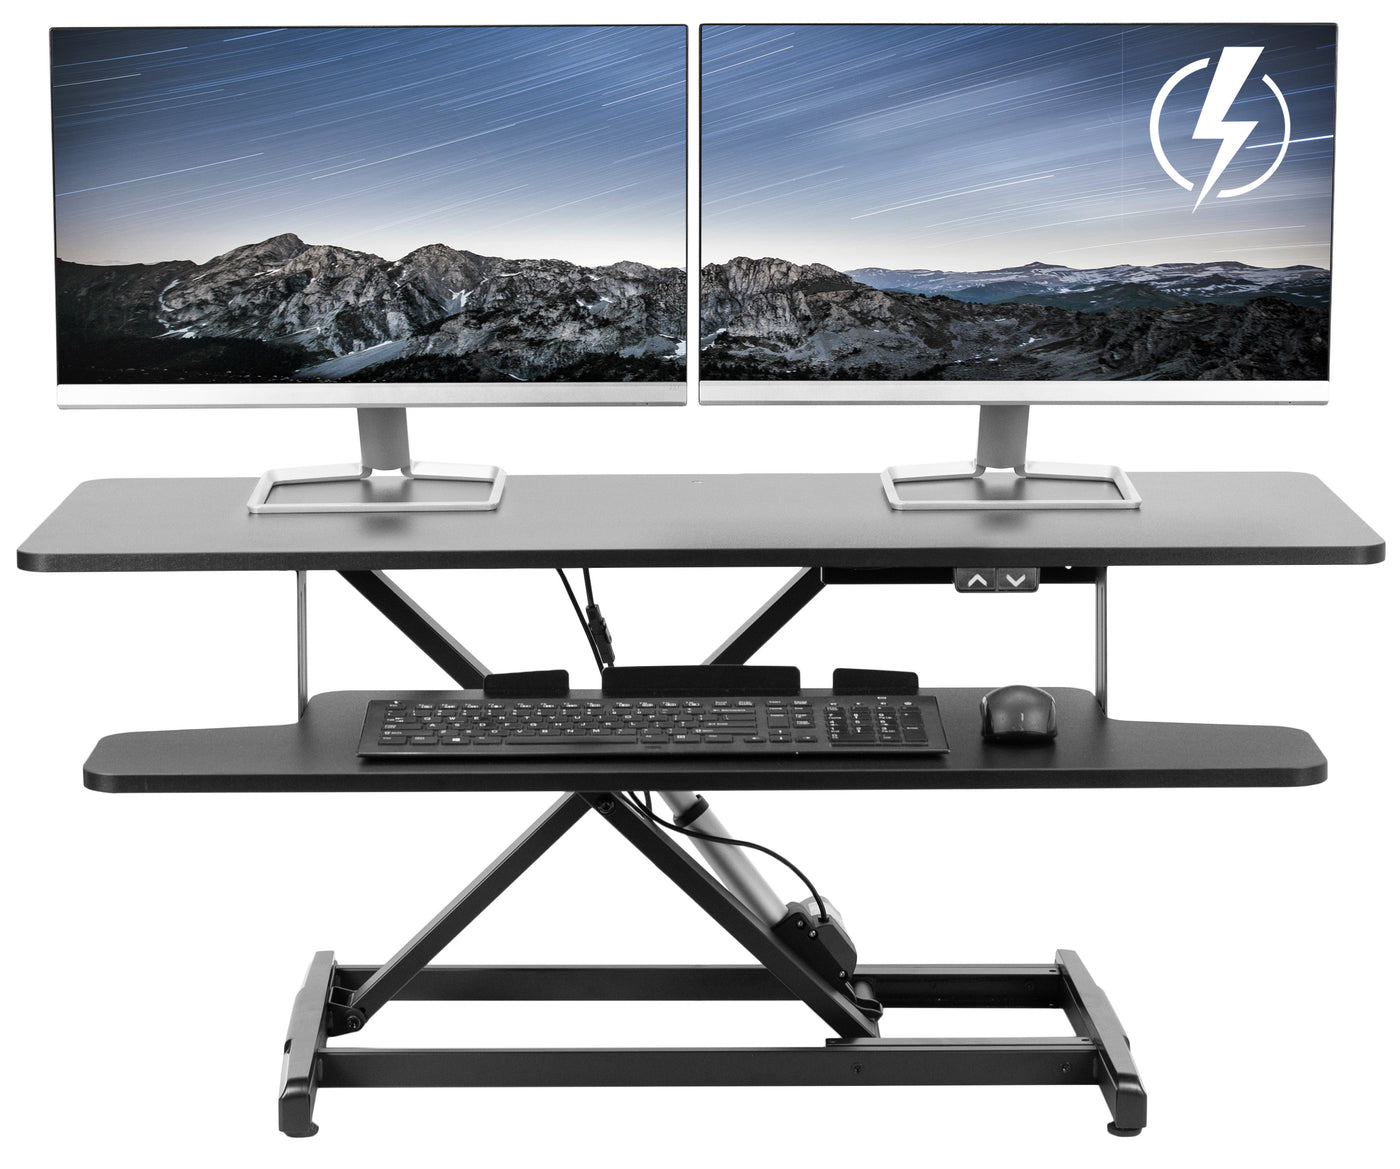 Electric Motor Desk Converter, Height Adjustable Riser, Sit to Stand Dual Monitor and Laptop Workstation with Wide Keyboard Tray